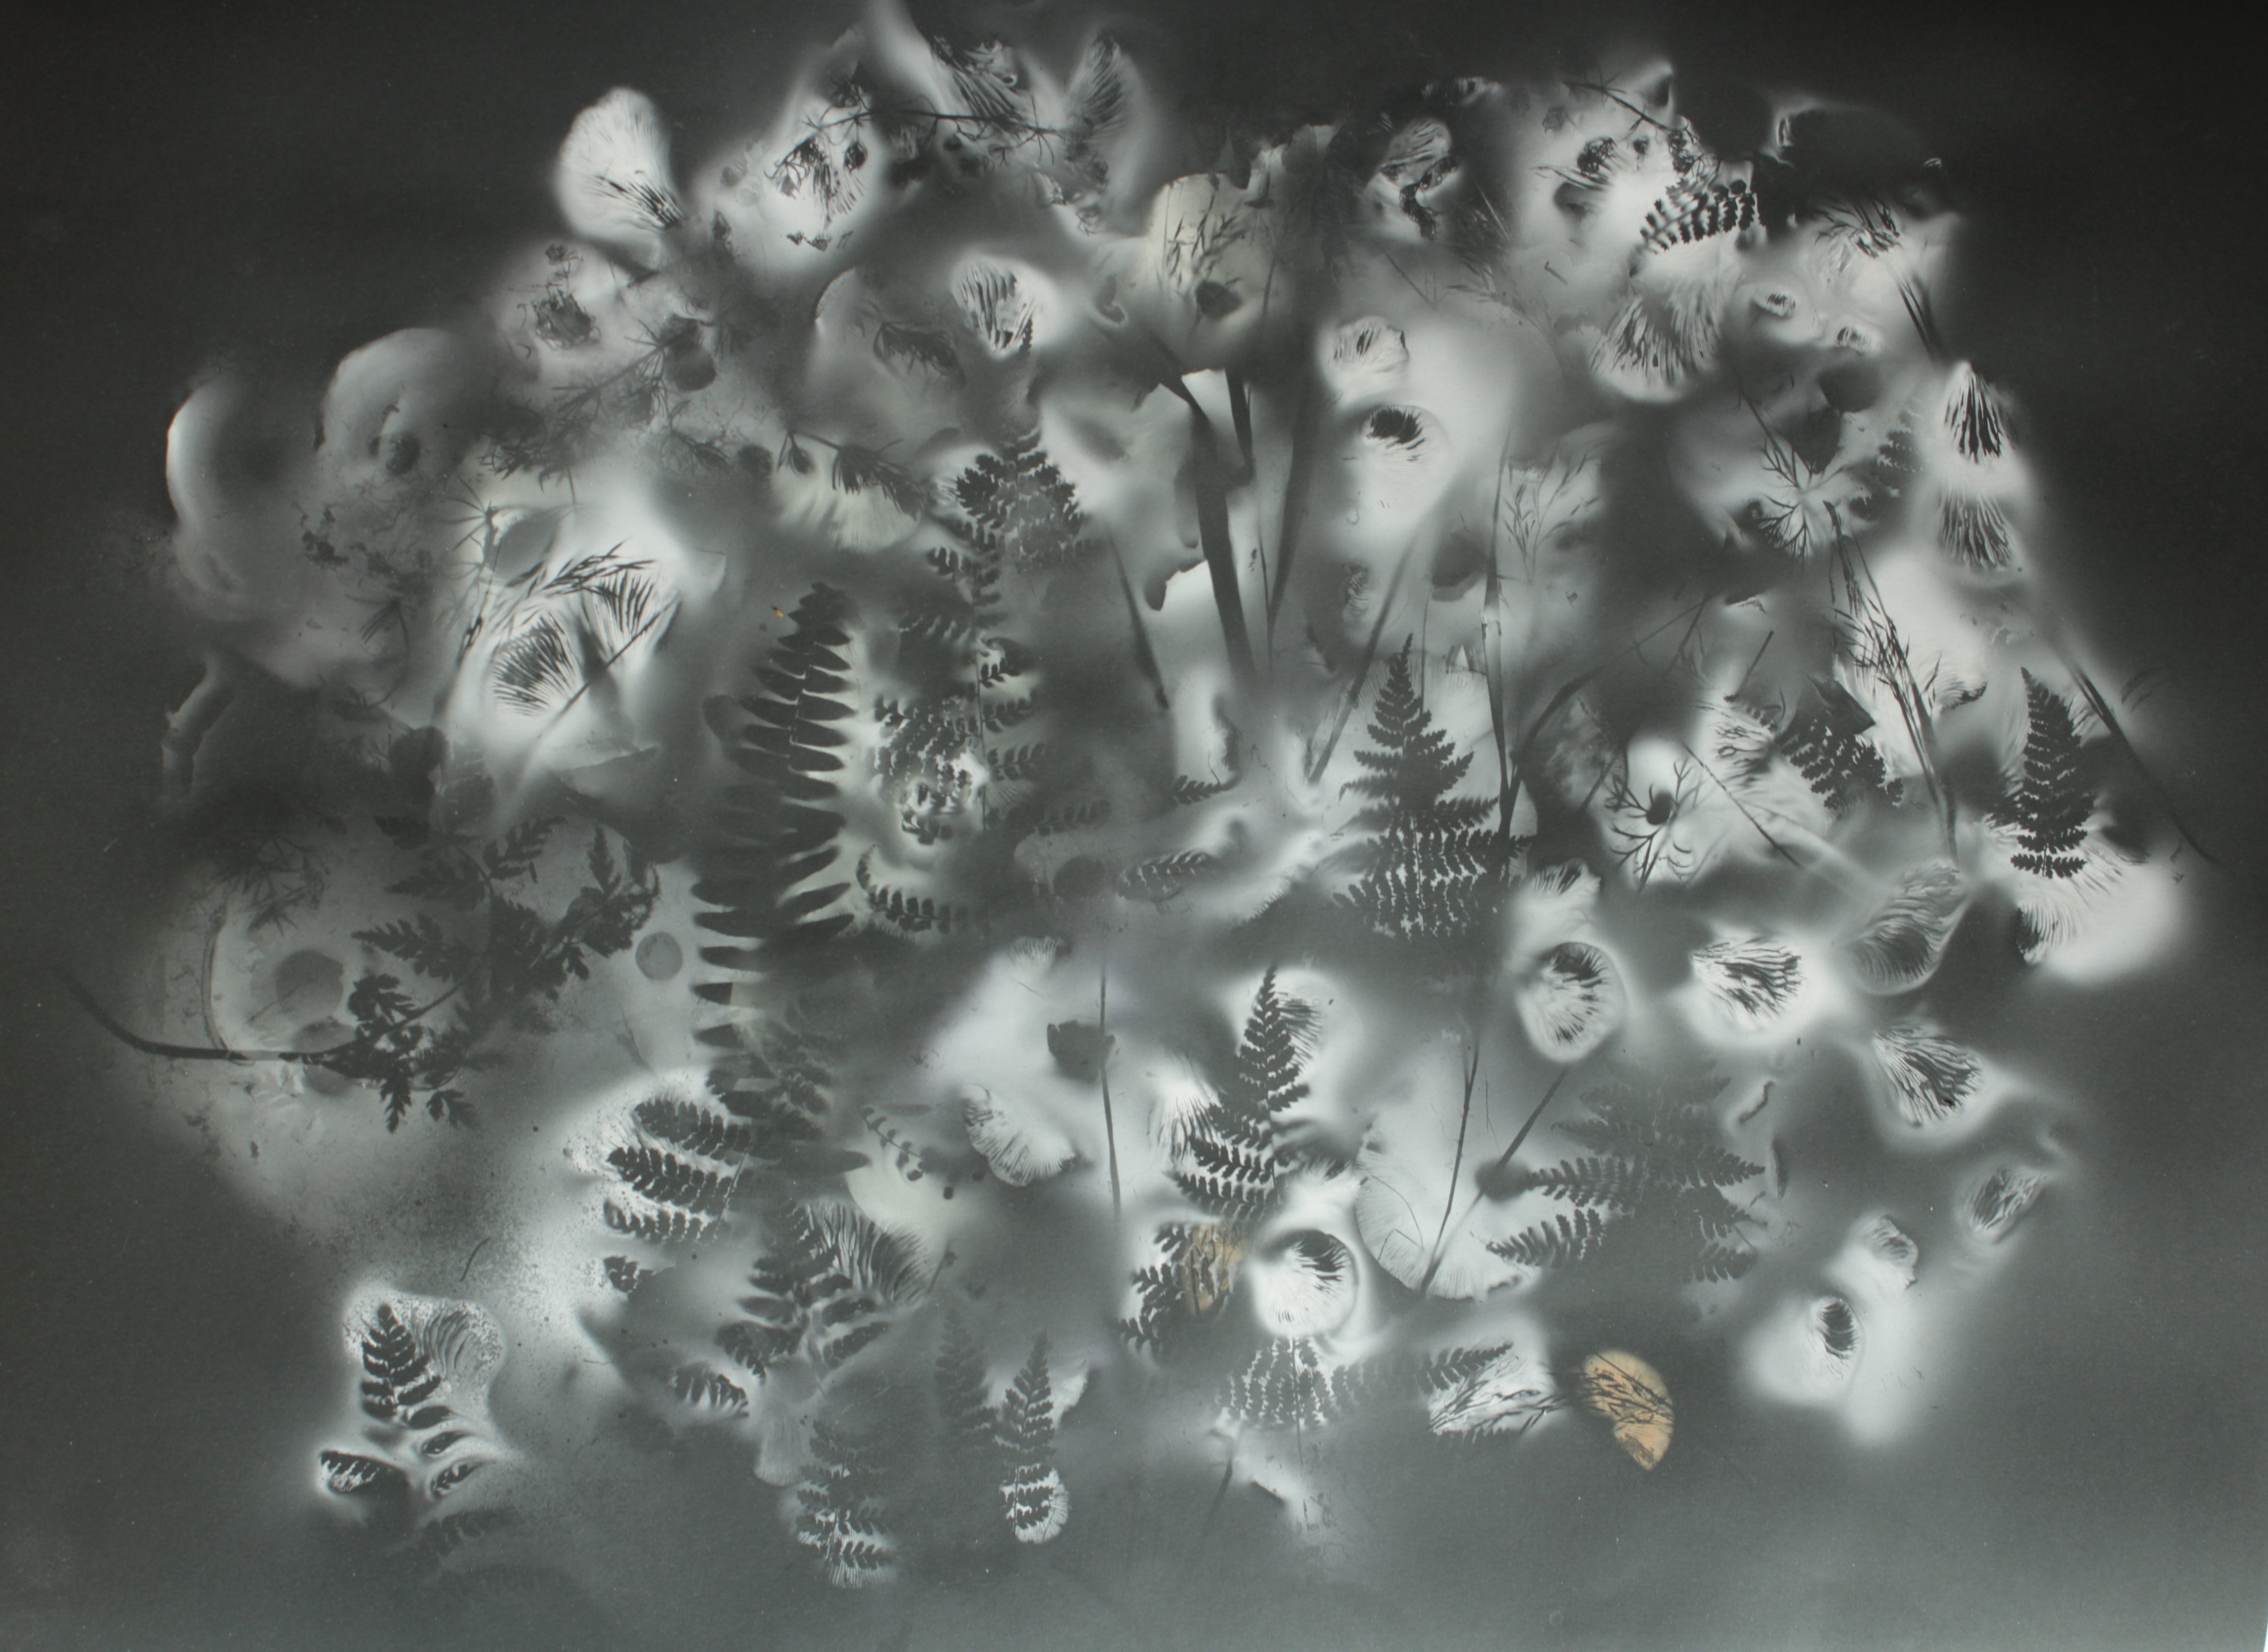 A black and white collection of ferns and fungal spores. Shadows against a foggy backdrop